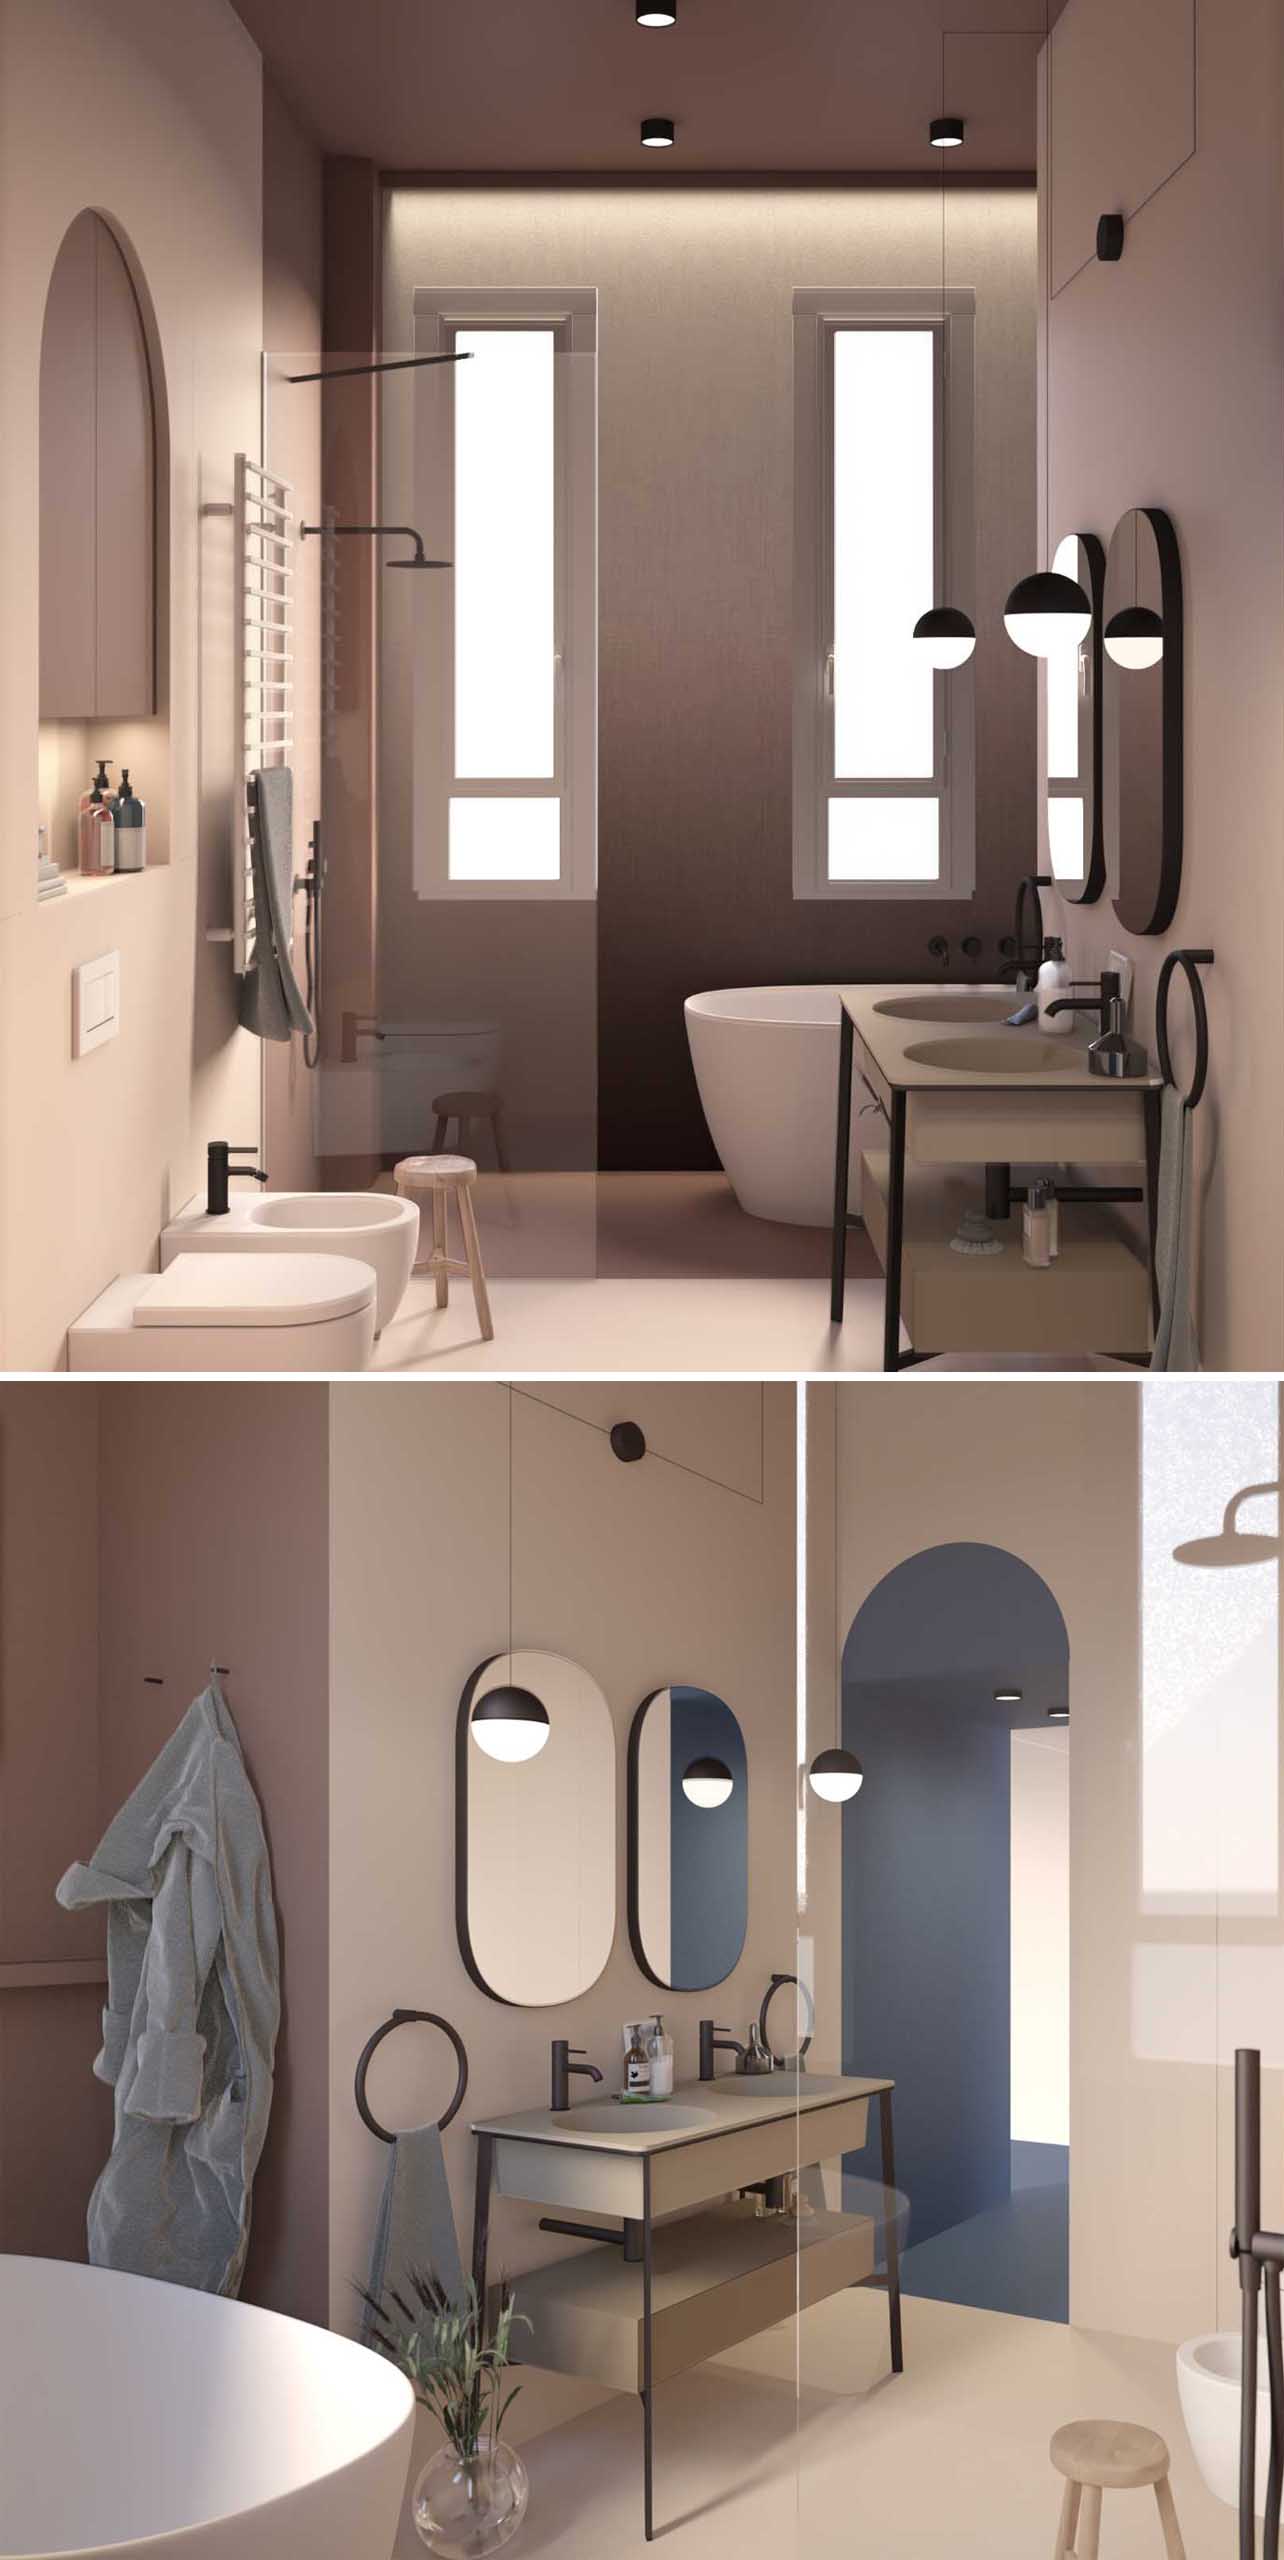 The rendering of a bathroom that uses color to define areas.